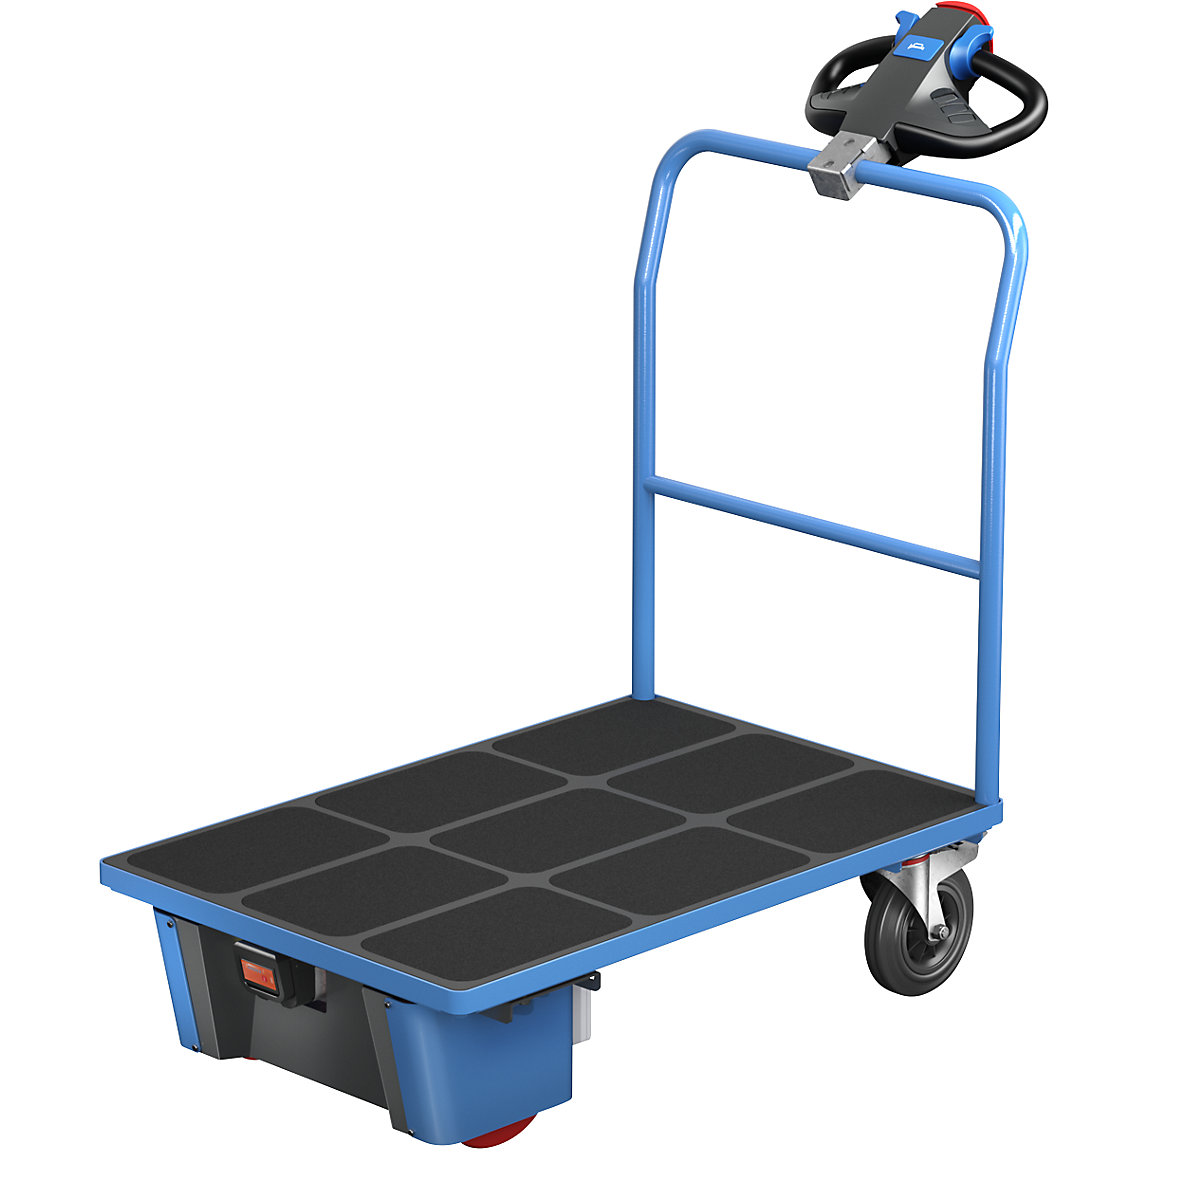 EUROKRAFTpro – Platform truck with electric drive, tubular push handle, LxWxH 1370 x 700 x 1300 mm, solid rubber tyres